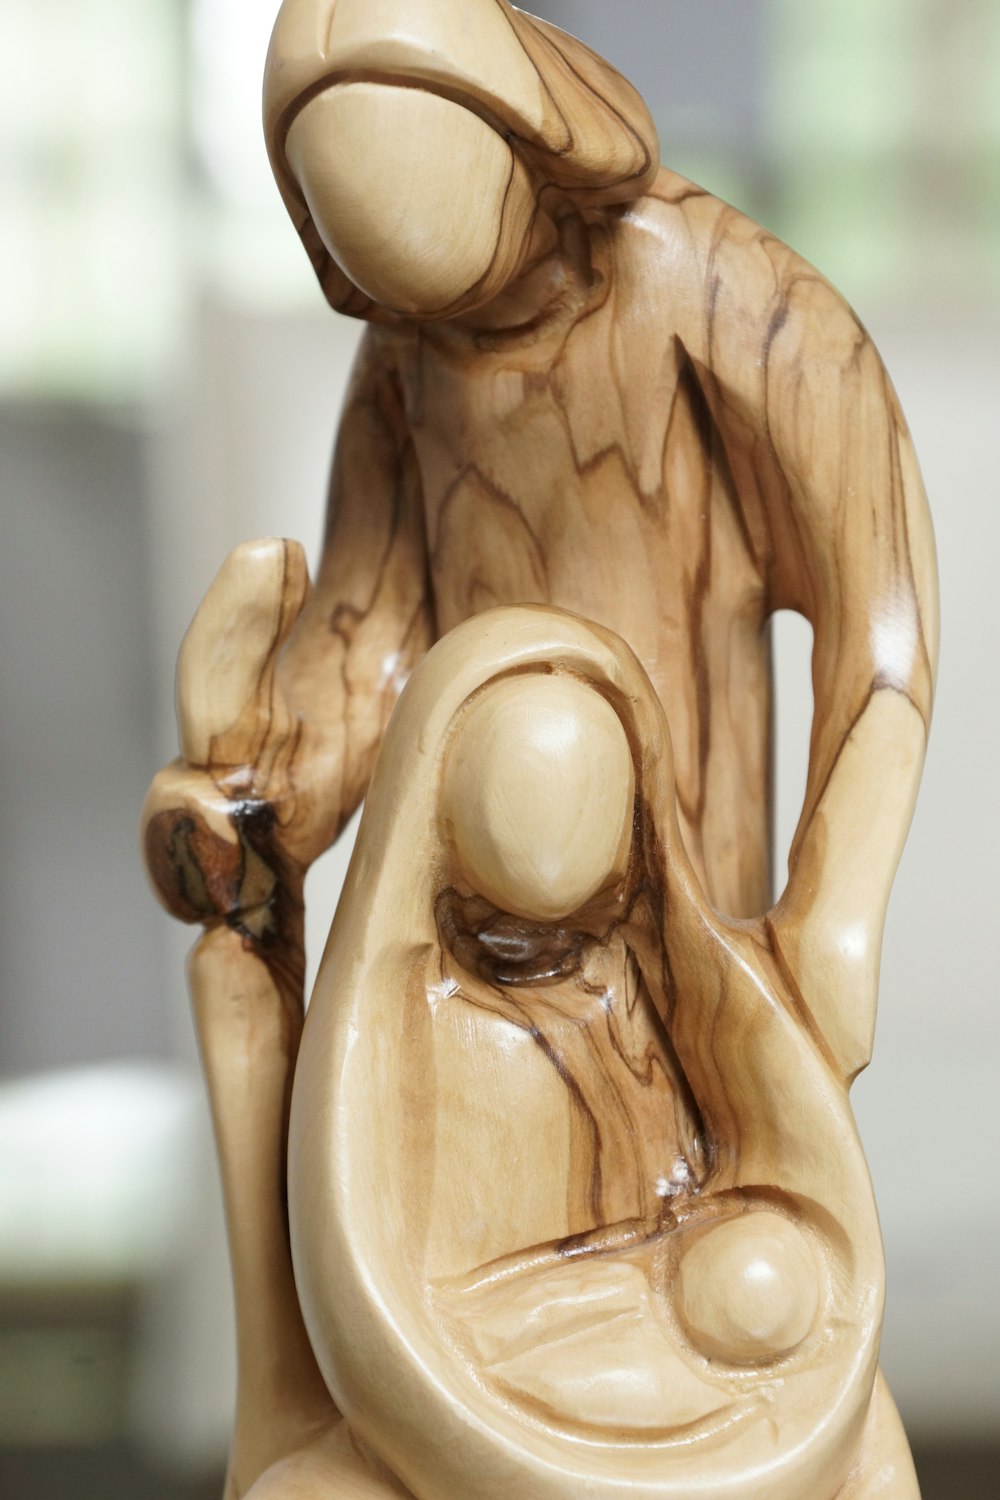 man and woman with baby wooden sculpture